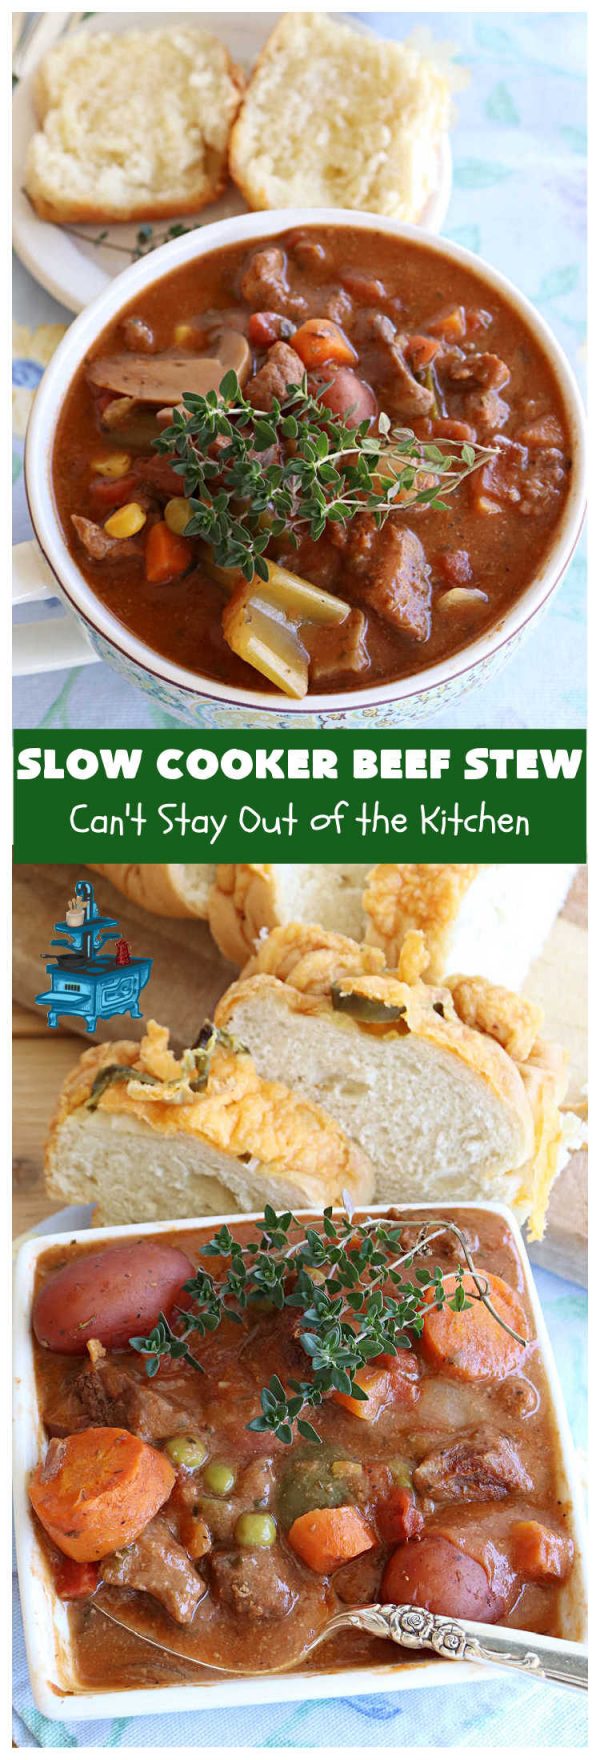 Slow Cooker Beef Stew – Can't Stay Out of the Kitchen